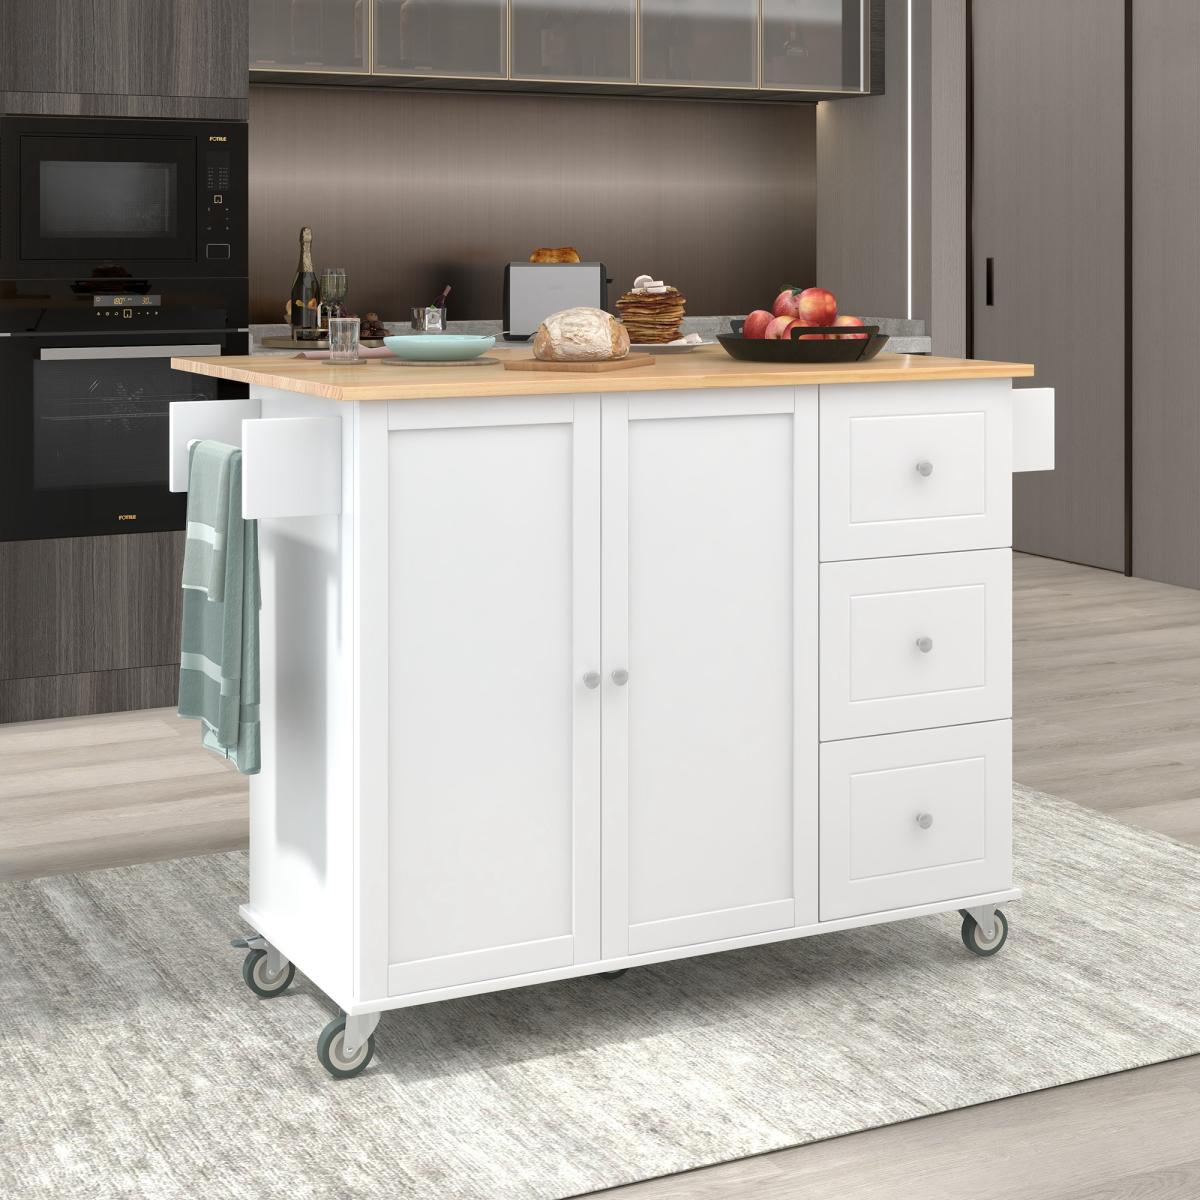 Rolling Mobile Kitchen Island with Solid Wood Top and Locking Wheels,52.7 Inch Width,Storage Cabinet and Drop Leaf Breakfast Bar,Spice Rack, Towel Rack & Drawer (White)